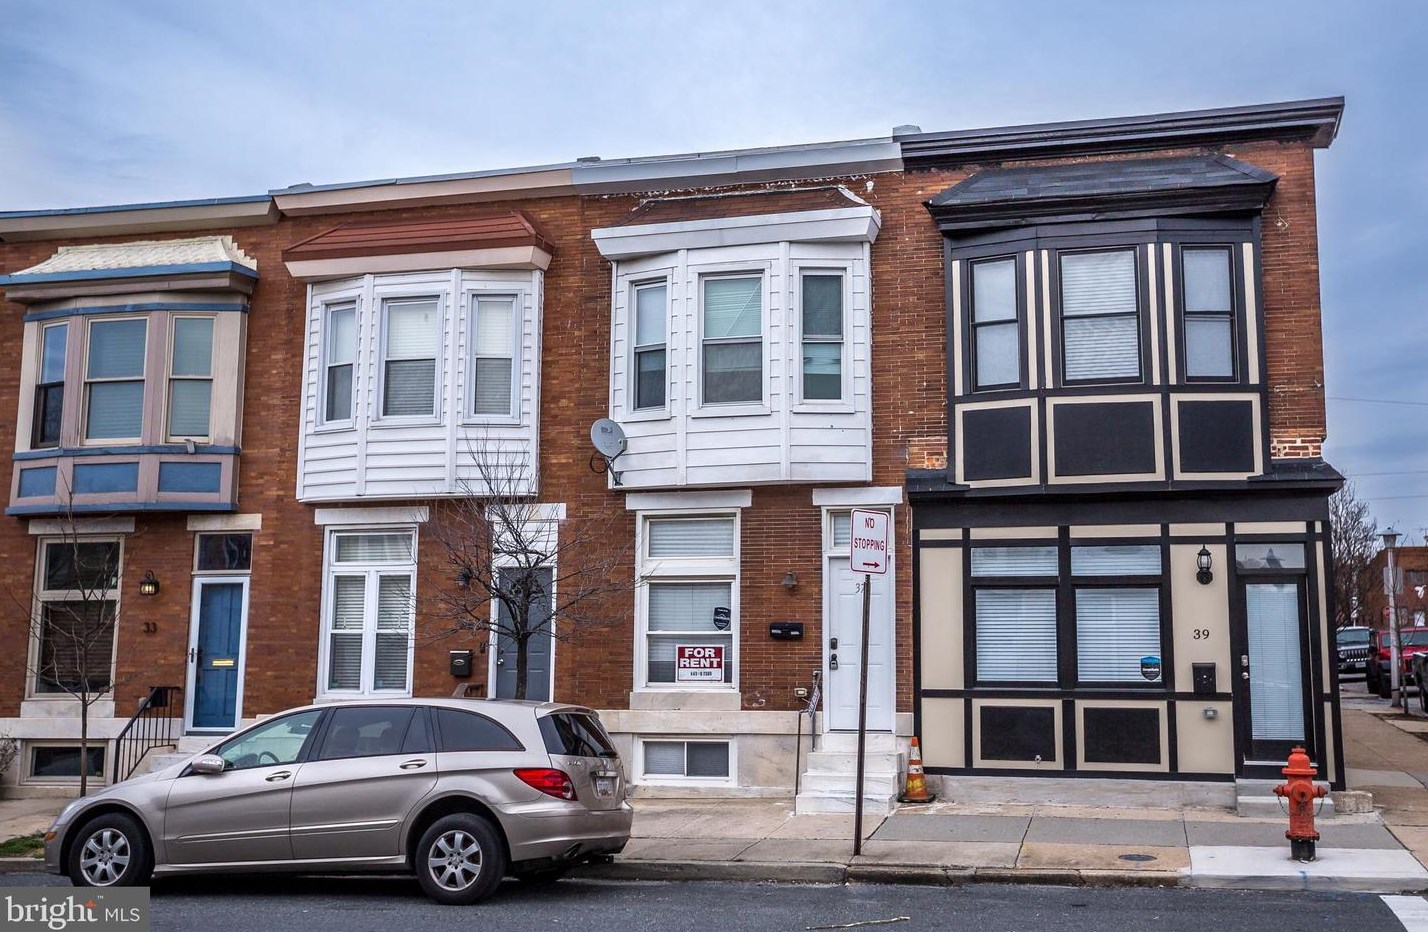 37 Ellwood Ave, Baltimore MD  21224-2242 exterior